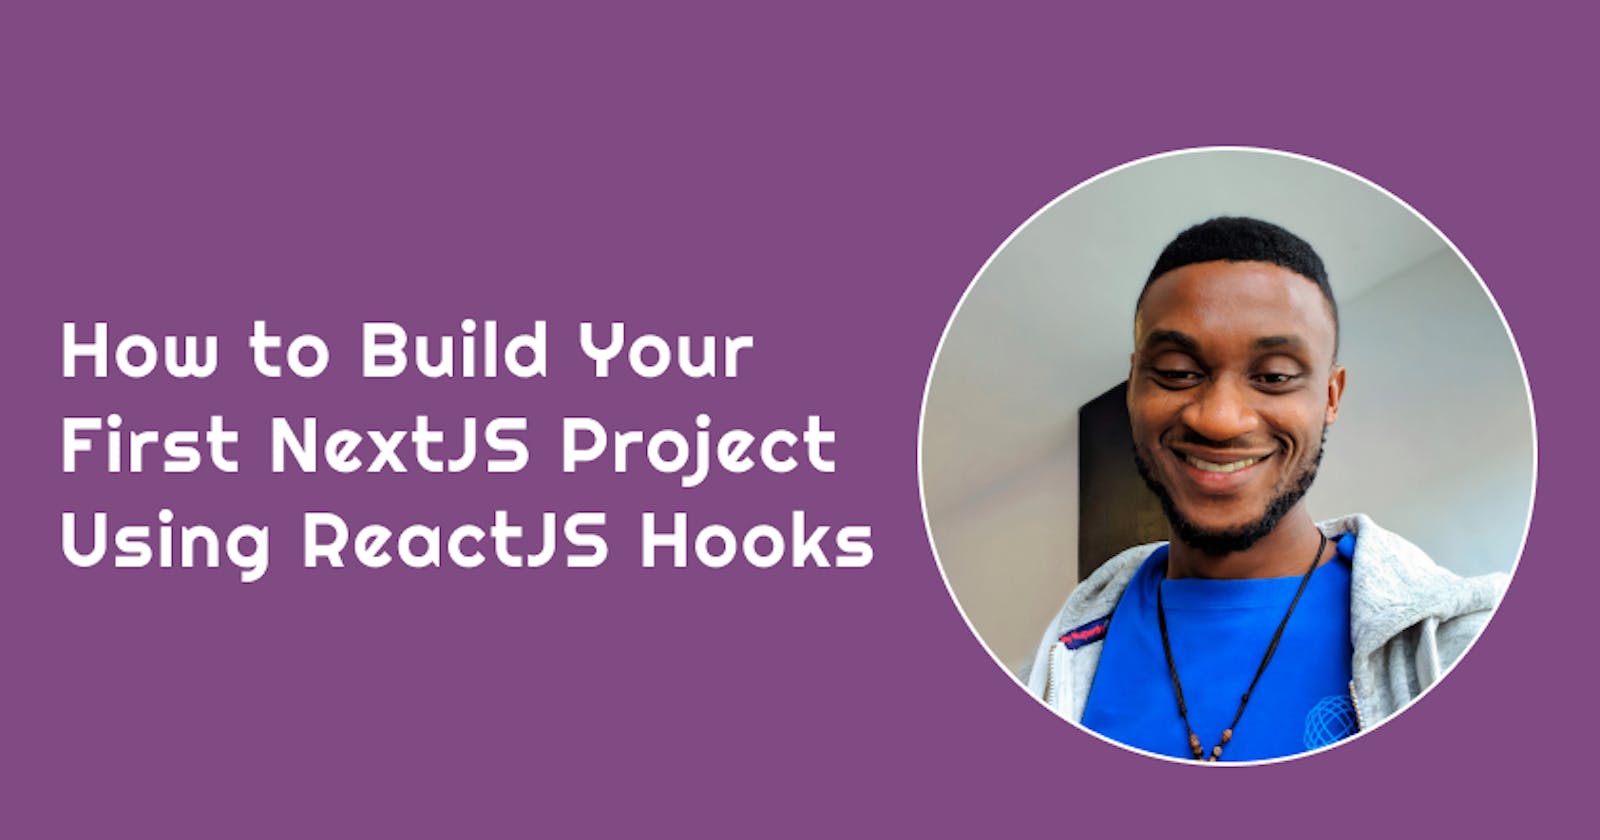 How to Build Your First NextJS Project Using ReactJS Hooks